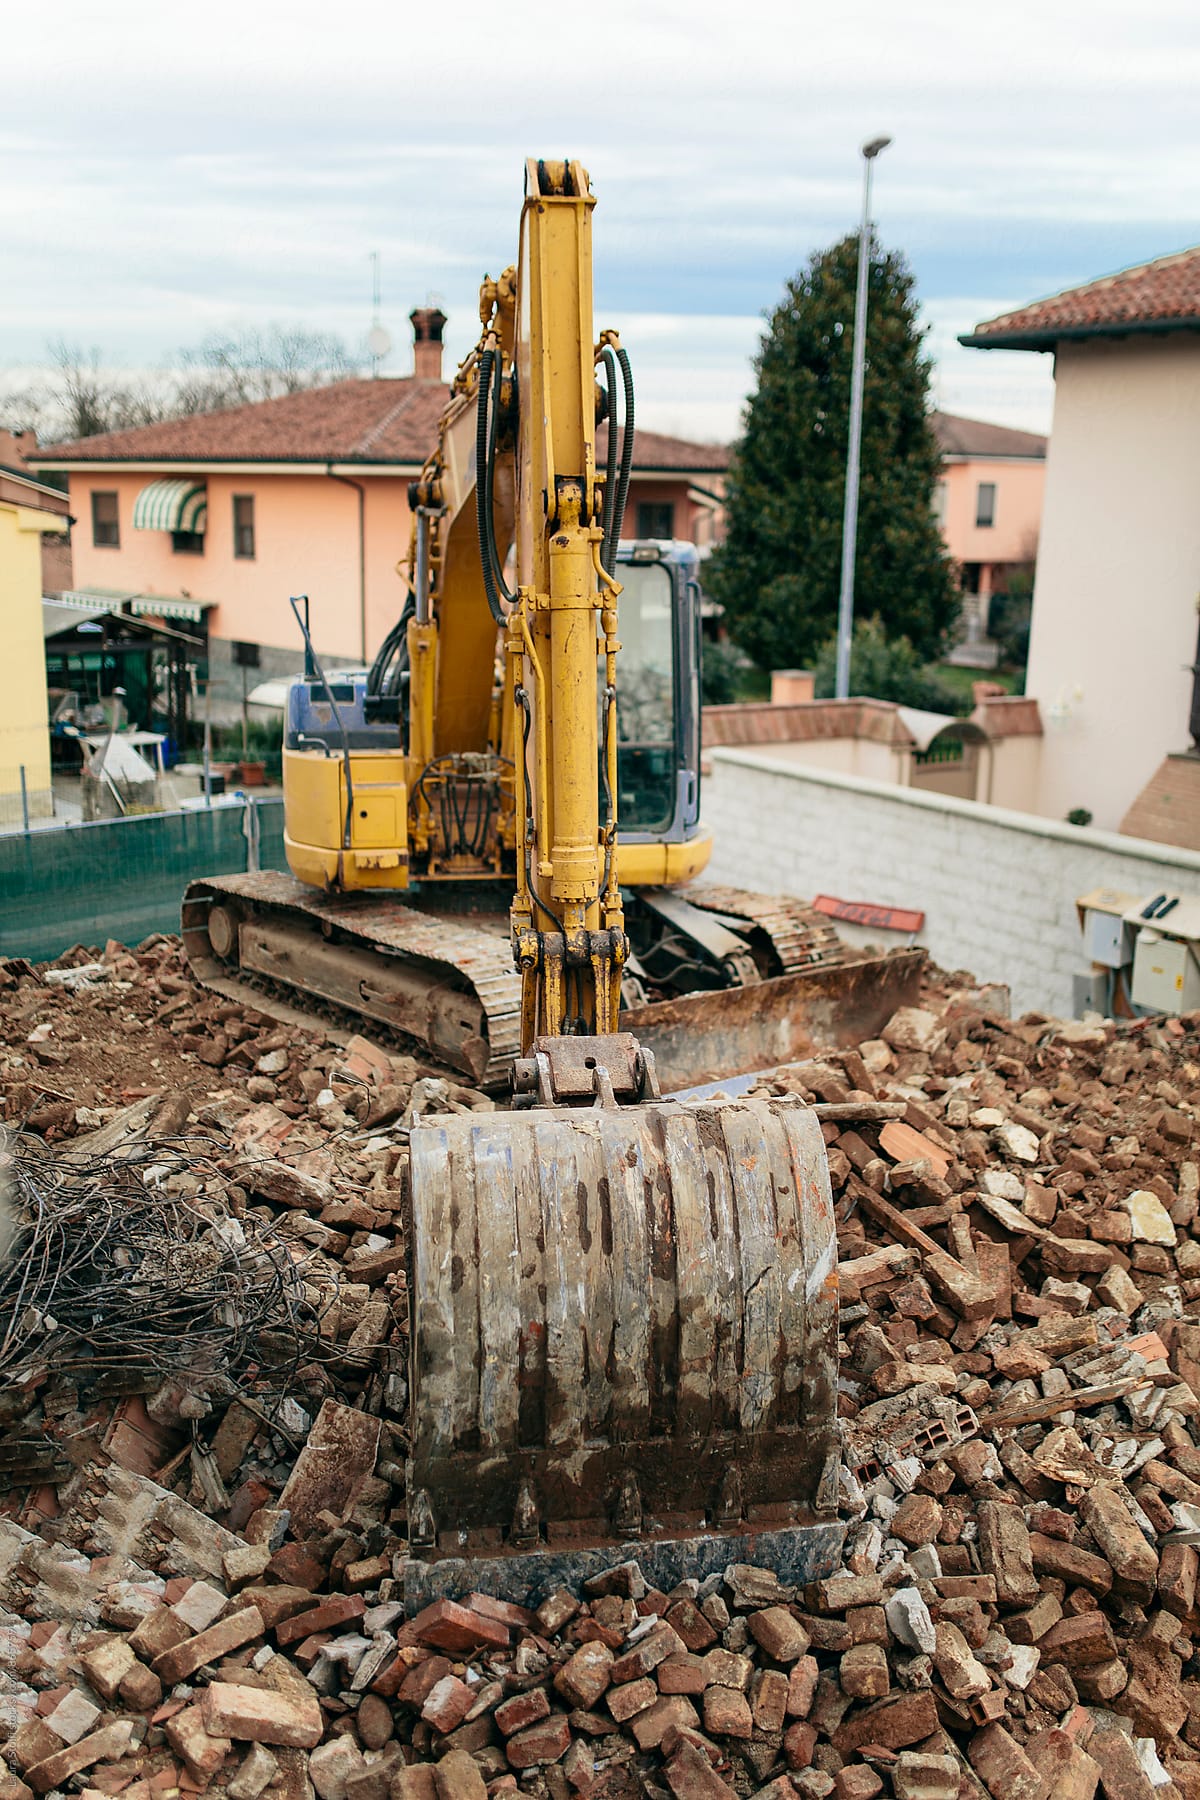 Above sight of bulldozer parked on top of ancient building ruins in Italy